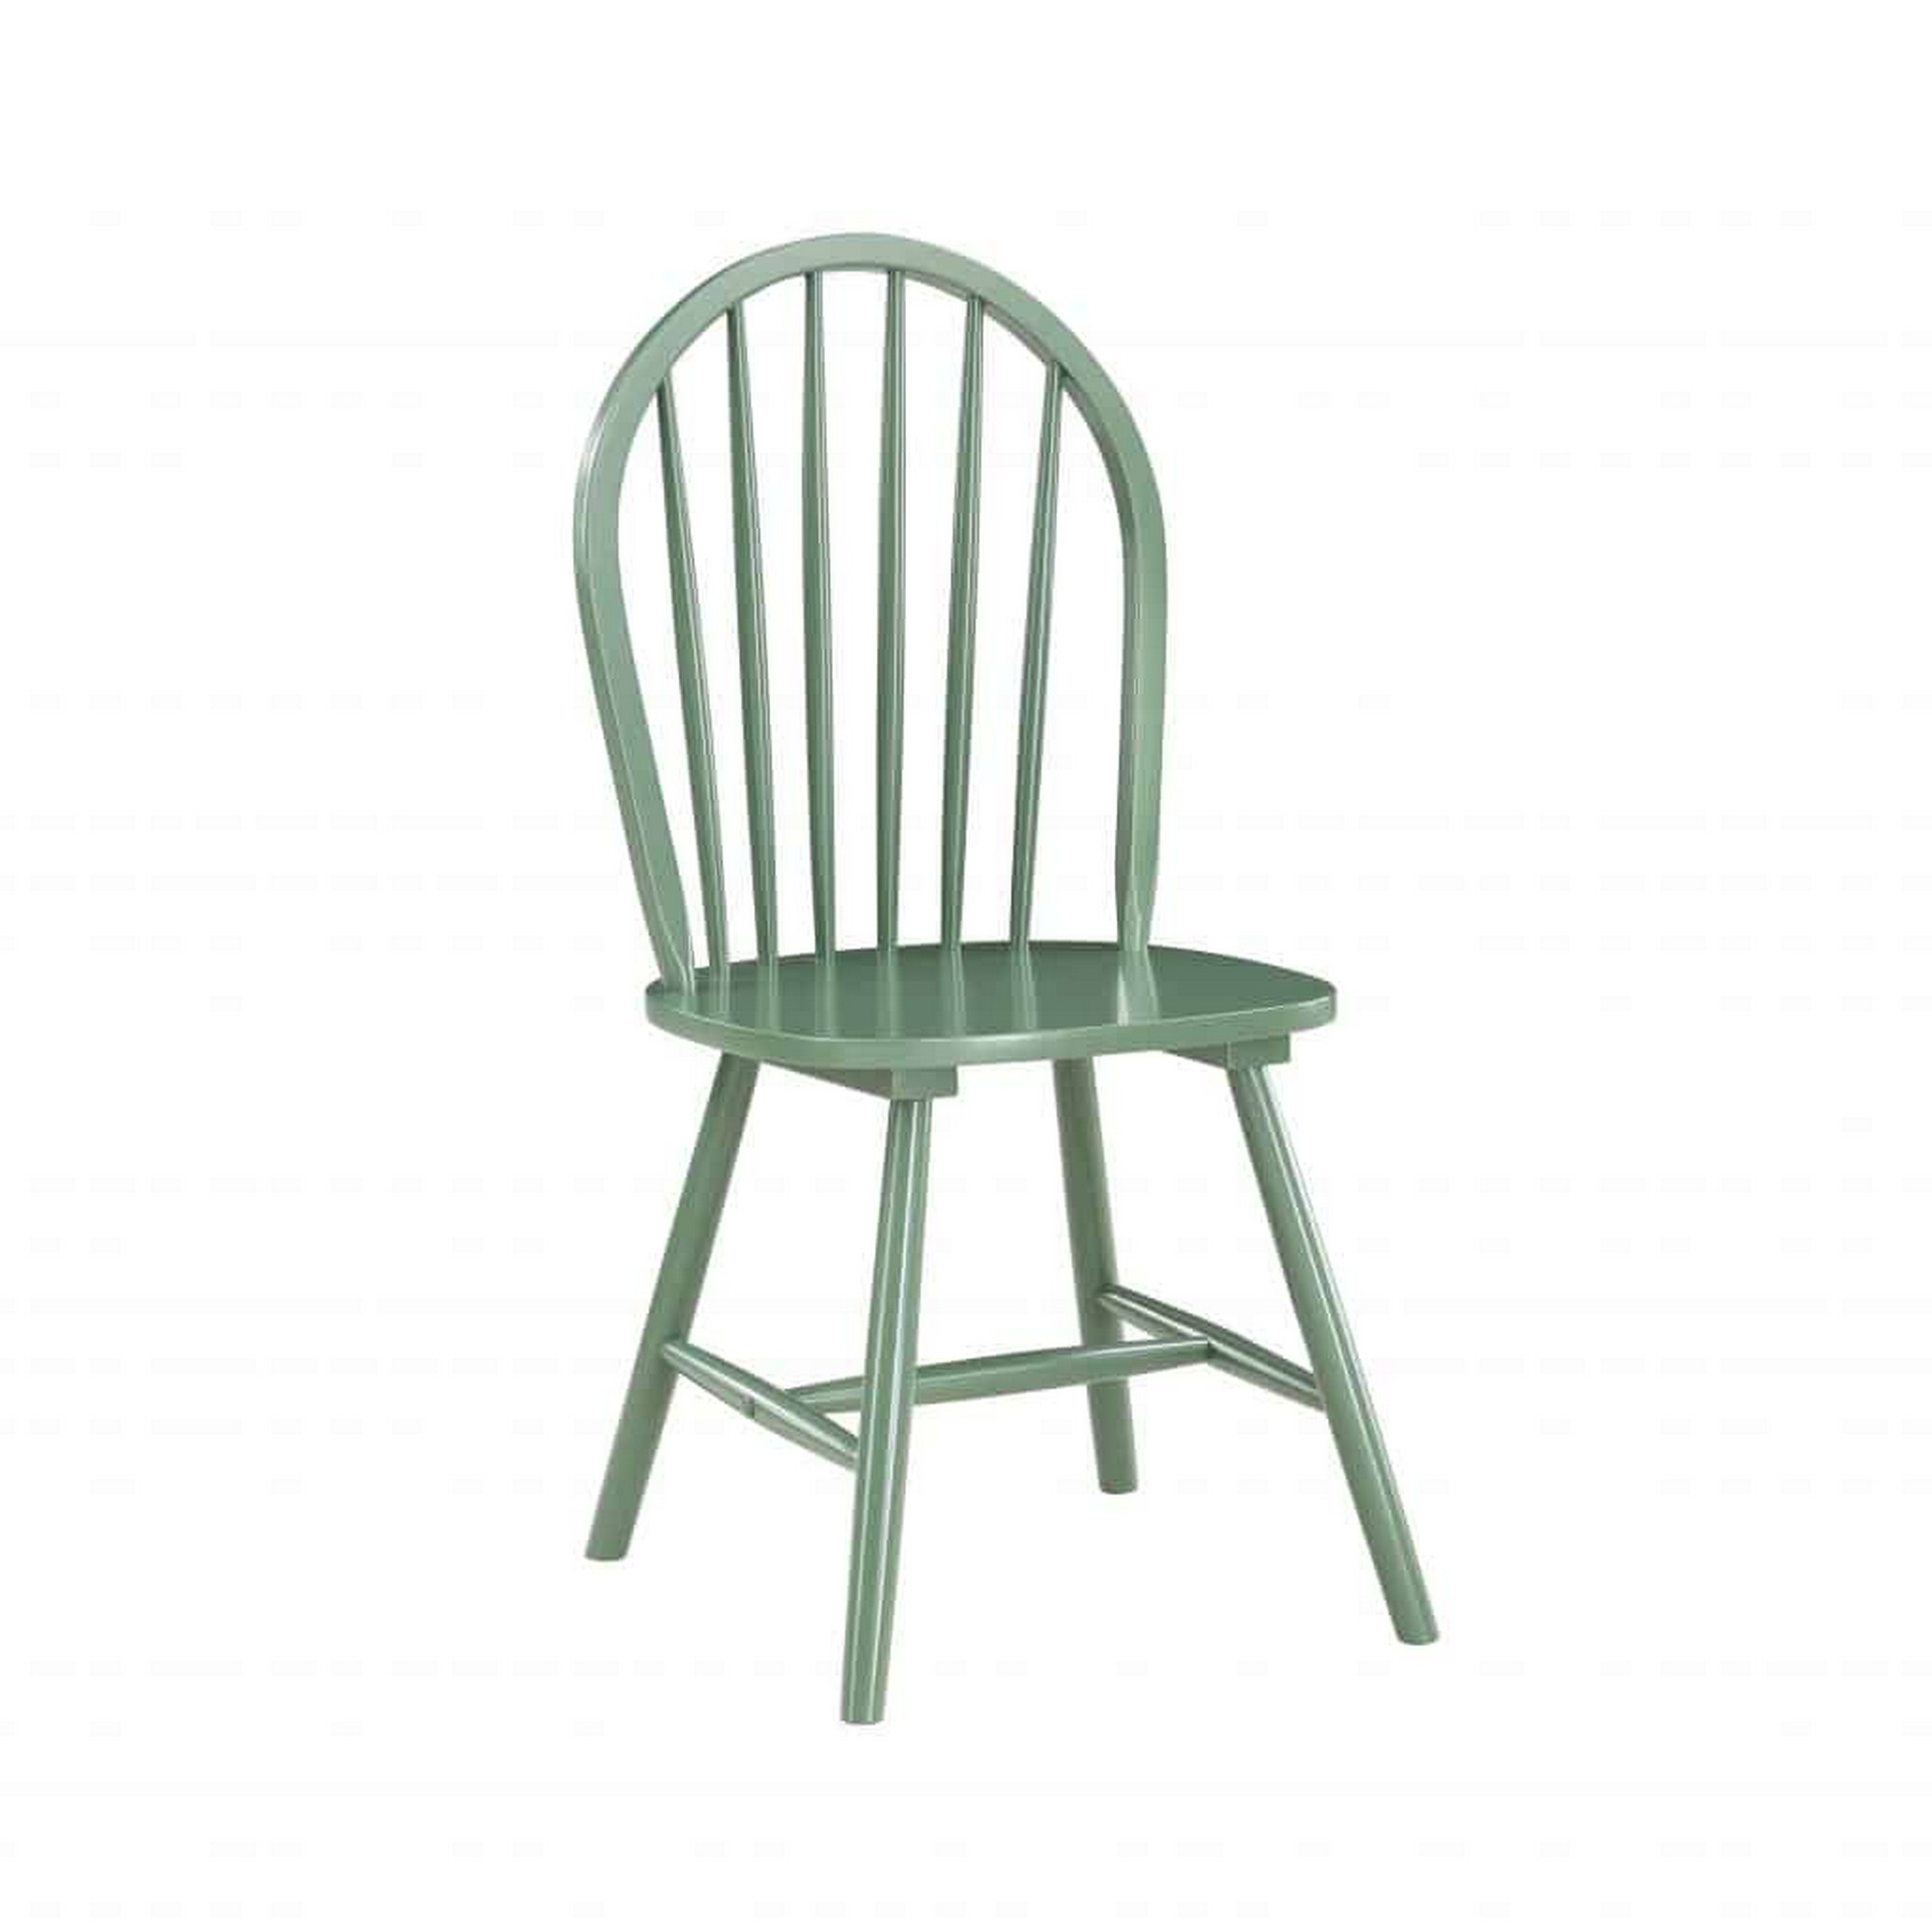 Irvin 18 Inch Modern Dining Chairs, Round Spindle Backs, Set Of 2, Green - Saltoro Sherpi